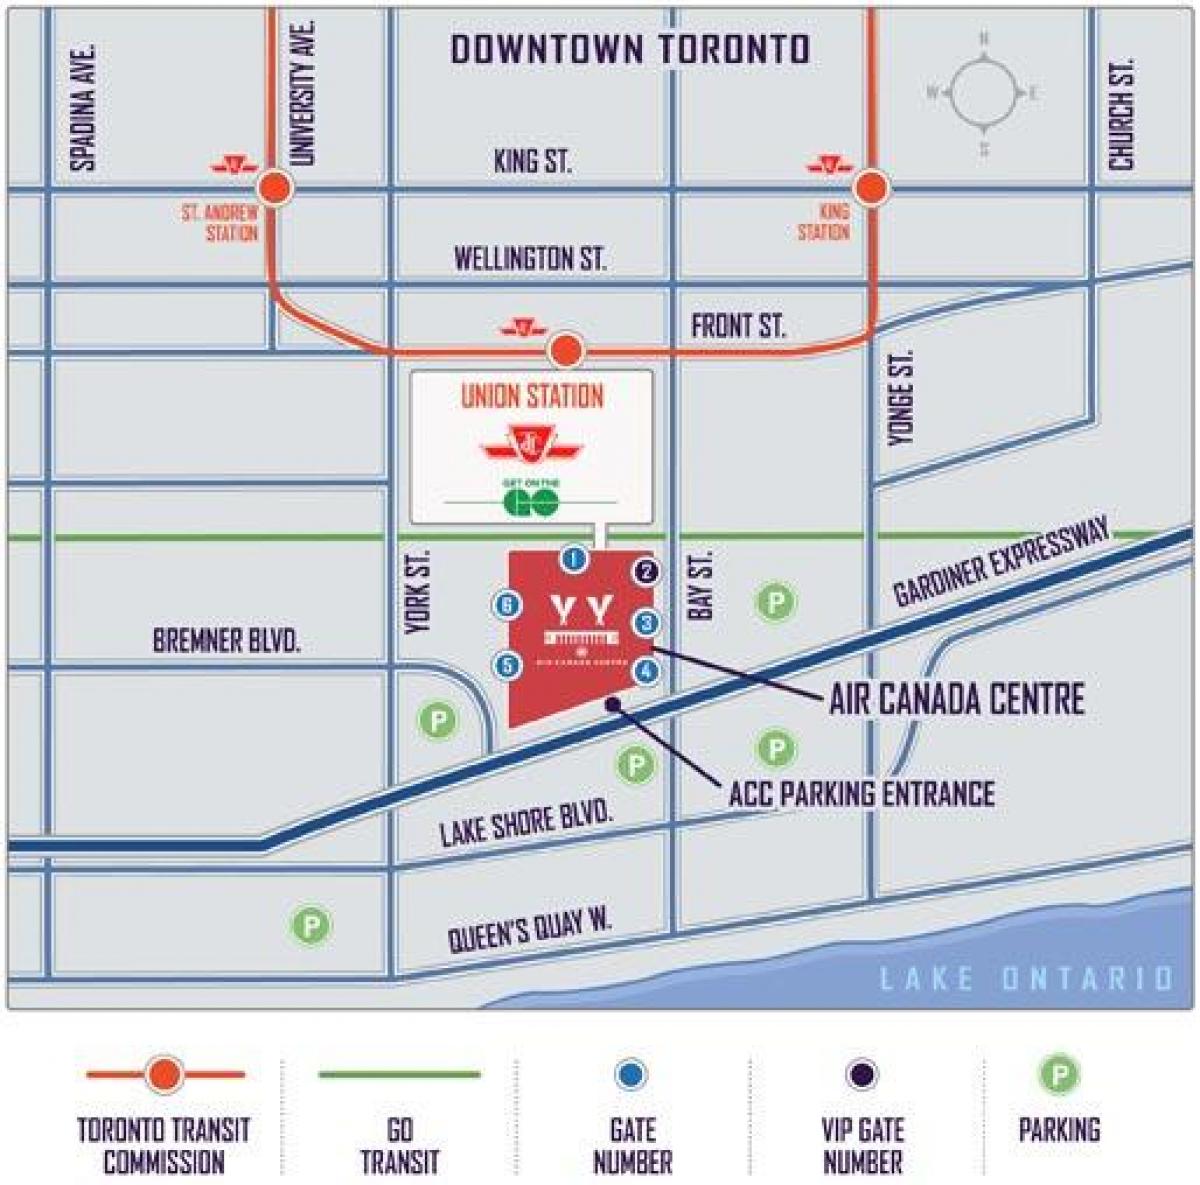 Map of Air Canada Centre parking - ACC